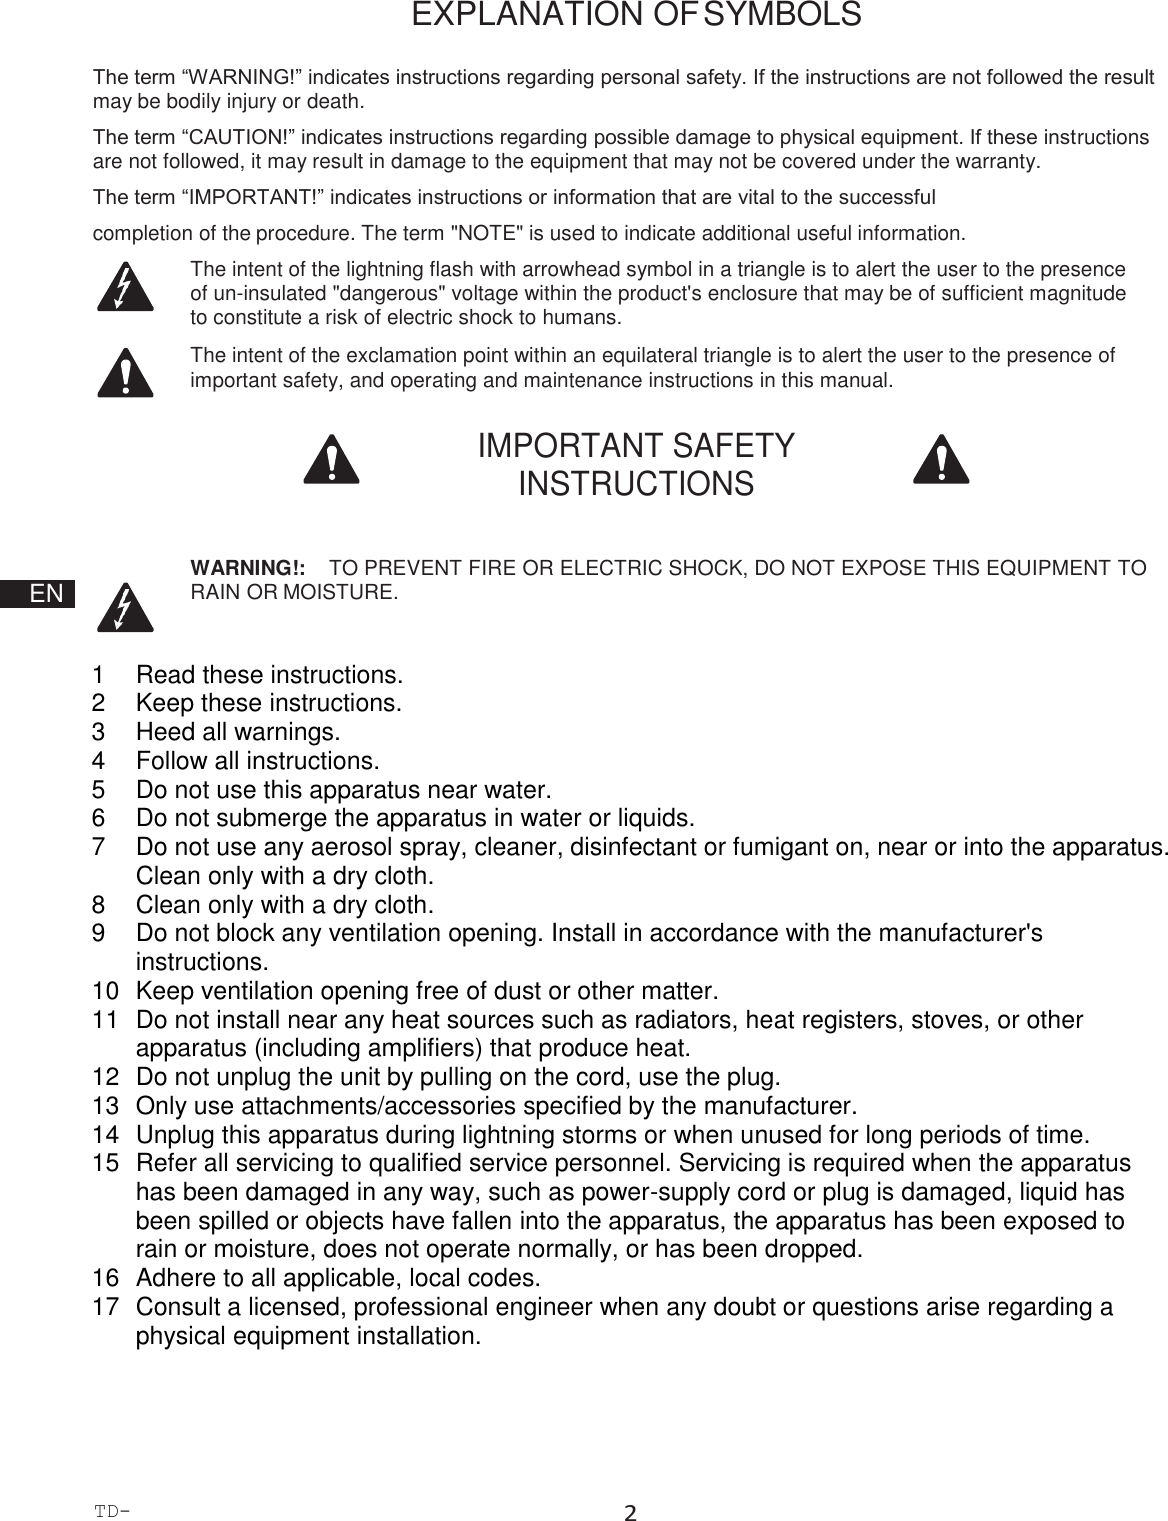 TD-000508-00-B 2  EXPLANATION OF SYMBOLS  The term “WARNING!” indicates instructions regarding personal safety. If the instructions are not followed the result may be bodily injury or death. The term “CAUTION!” indicates instructions regarding possible damage to physical equipment. If these instructions are not followed, it may result in damage to the equipment that may not be covered under the warranty. The term “IMPORTANT!” indicates instructions or information that are vital to the successful completion of the procedure. The term &quot;NOTE&quot; is used to indicate additional useful information. The intent of the lightning flash with arrowhead symbol in a triangle is to alert the user to the presence of un-insulated &quot;dangerous&quot; voltage within the product&apos;s enclosure that may be of sufficient magnitude to constitute a risk of electric shock to humans. The intent of the exclamation point within an equilateral triangle is to alert the user to the presence of important safety, and operating and maintenance instructions in this manual.  IMPORTANT SAFETY INSTRUCTIONS        EN  WARNING!:    TO PREVENT FIRE OR ELECTRIC SHOCK, DO NOT EXPOSE THIS EQUIPMENT TO RAIN OR MOISTURE.   1  Read these instructions. 2  Keep these instructions. 3  Heed all warnings. 4  Follow all instructions. 5  Do not use this apparatus near water. 6  Do not submerge the apparatus in water or liquids. 7  Do not use any aerosol spray, cleaner, disinfectant or fumigant on, near or into the apparatus. Clean only with a dry cloth. 8  Clean only with a dry cloth. 9  Do not block any ventilation opening. Install in accordance with the manufacturer&apos;s instructions. 10  Keep ventilation opening free of dust or other matter. 11  Do not install near any heat sources such as radiators, heat registers, stoves, or other apparatus (including amplifiers) that produce heat. 12  Do not unplug the unit by pulling on the cord, use the plug. 13  Only use attachments/accessories specified by the manufacturer. 14  Unplug this apparatus during lightning storms or when unused for long periods of time. 15  Refer all servicing to qualified service personnel. Servicing is required when the apparatus has been damaged in any way, such as power-supply cord or plug is damaged, liquid has been spilled or objects have fallen into the apparatus, the apparatus has been exposed to rain or moisture, does not operate normally, or has been dropped. 16  Adhere to all applicable, local codes. 17  Consult a licensed, professional engineer when any doubt or questions arise regarding a physical equipment installation. 